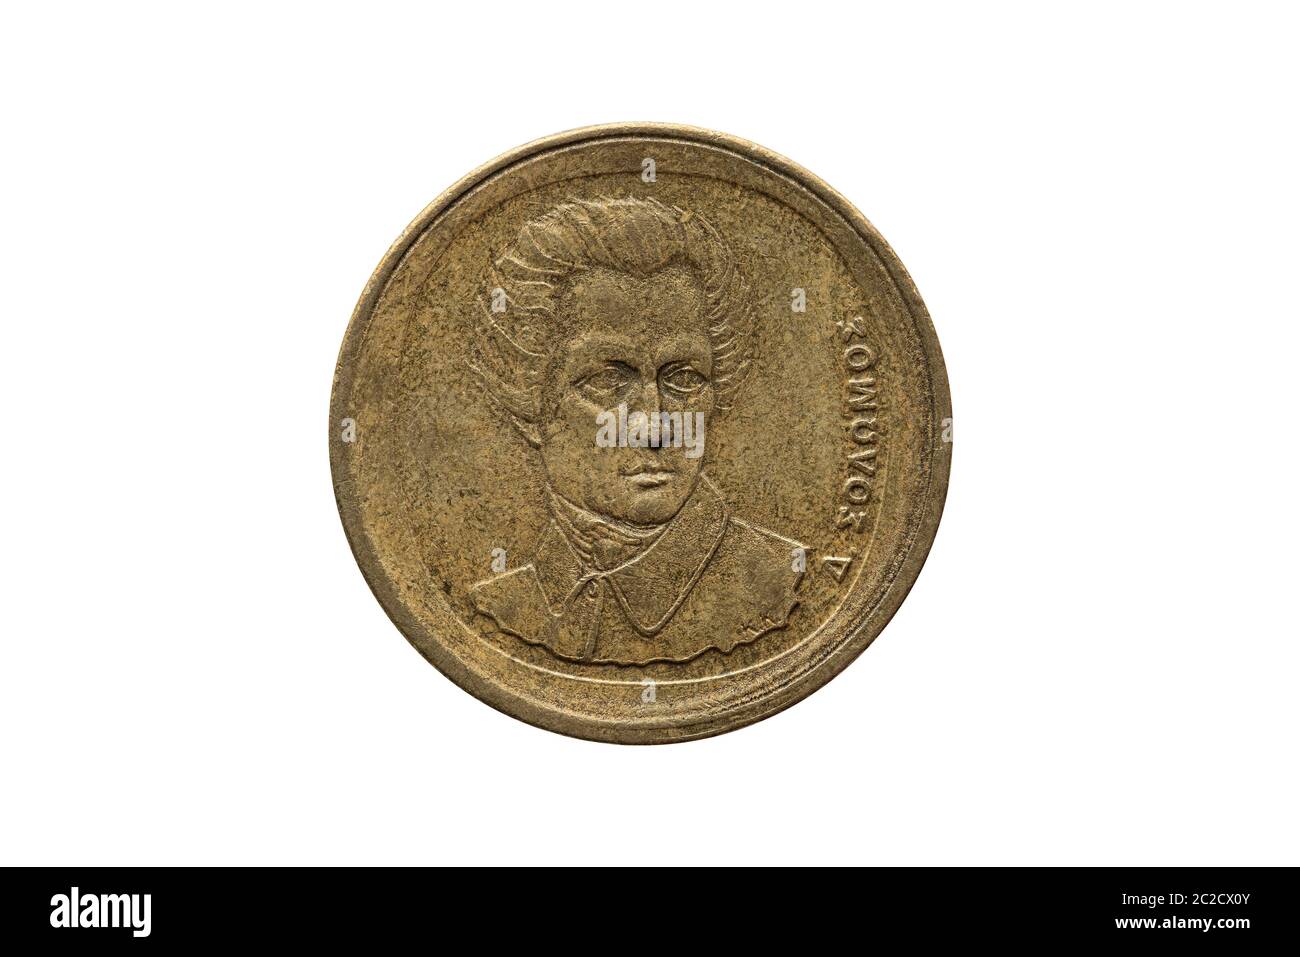 Greek old 20 drachmas coin dated 1990 obverse with a portrait image of Dionysios Solomos cut out and isolated on a white background Stock Photo